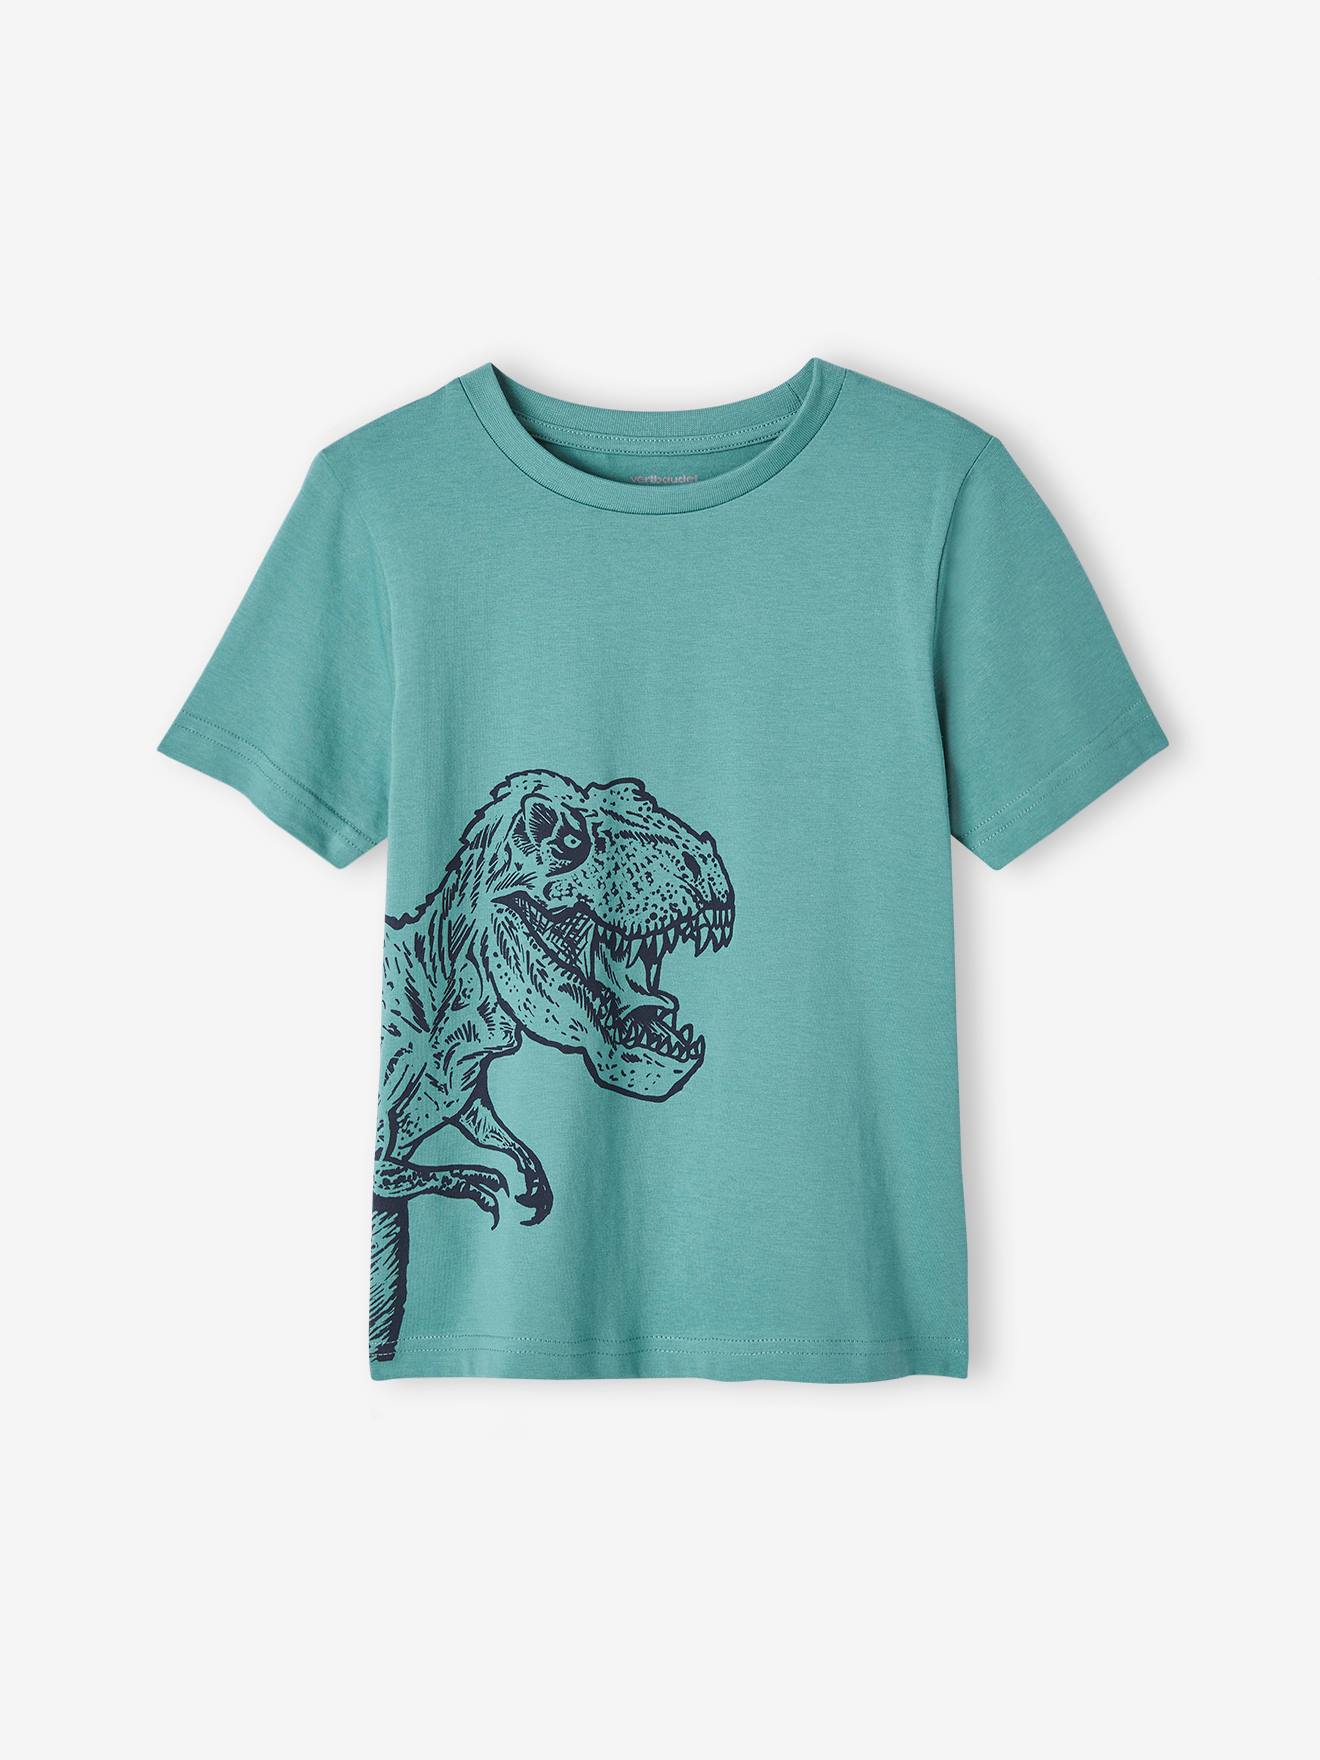 T-Shirt with Message for Boys sage green